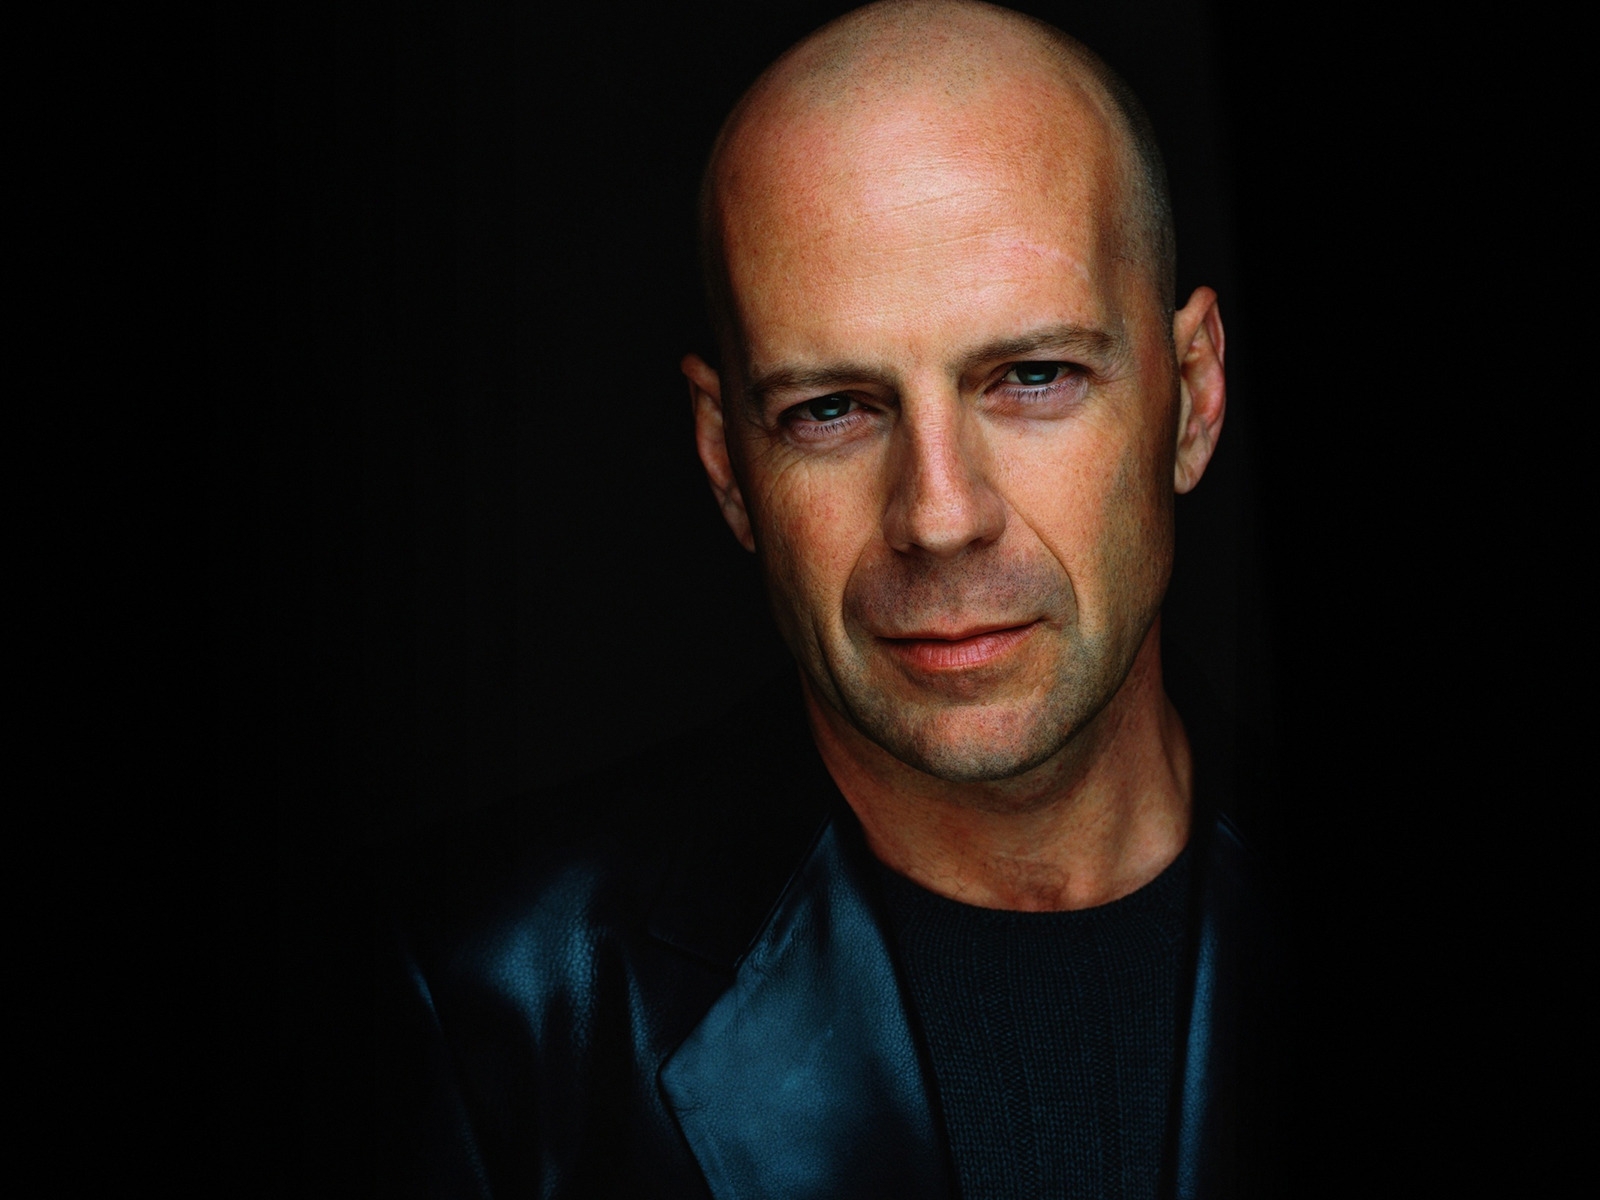 Bruce Willis Profile Look for 1600 x 1200 resolution